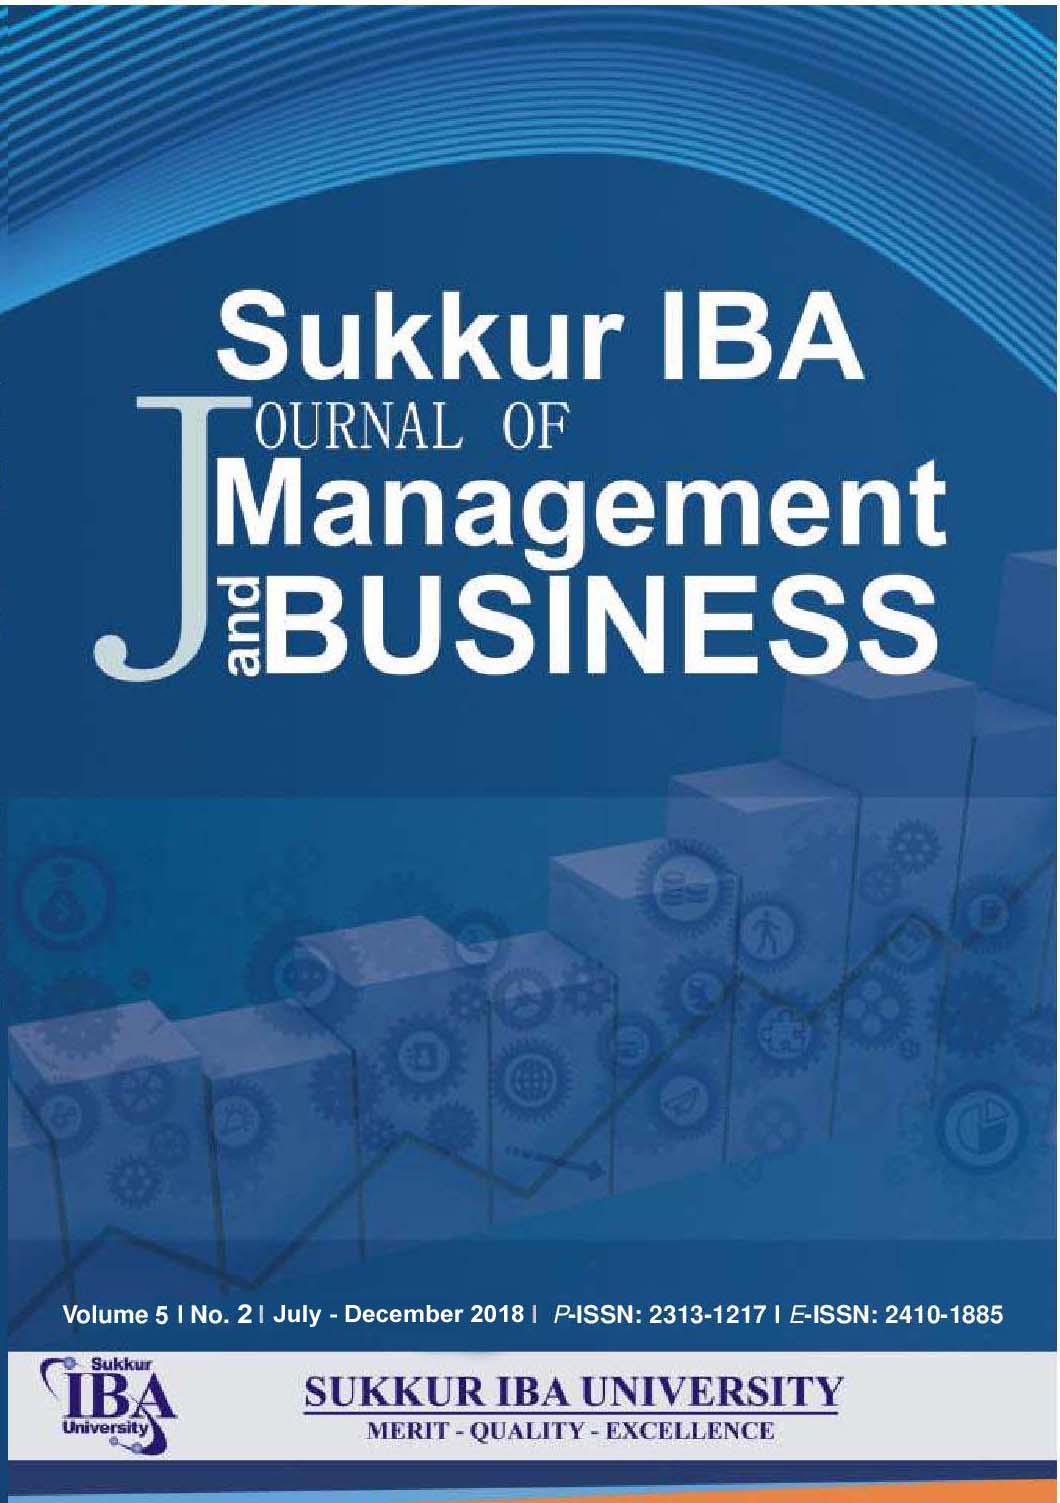 					View Vol. 5 No. 2 (2018): Sukkur IBA Journal of Management and Business
				